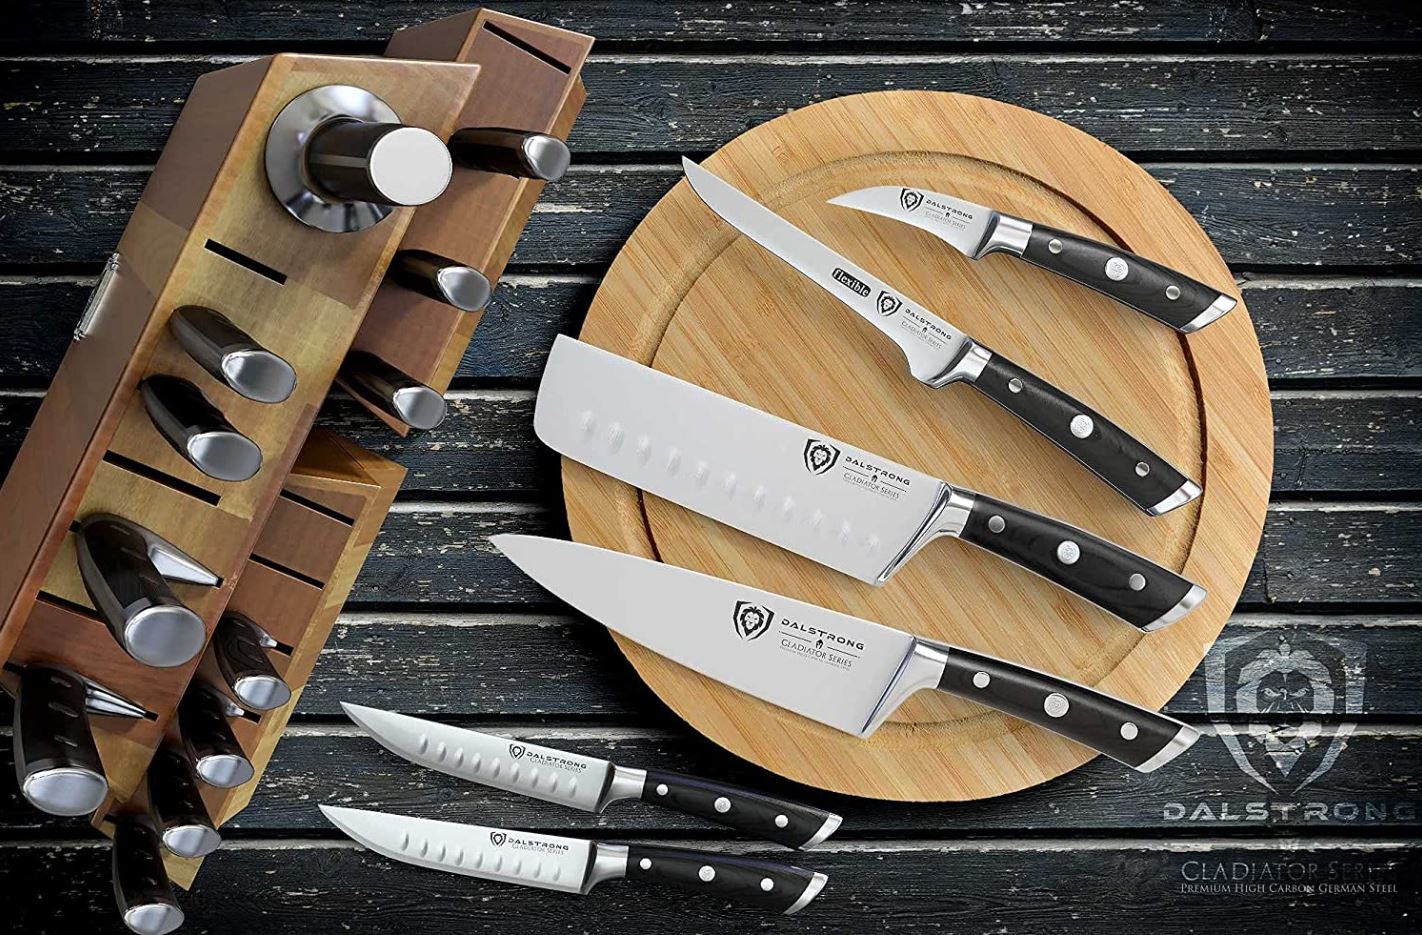 60 B L A D E S ideas  cool knives, knives and swords, knife